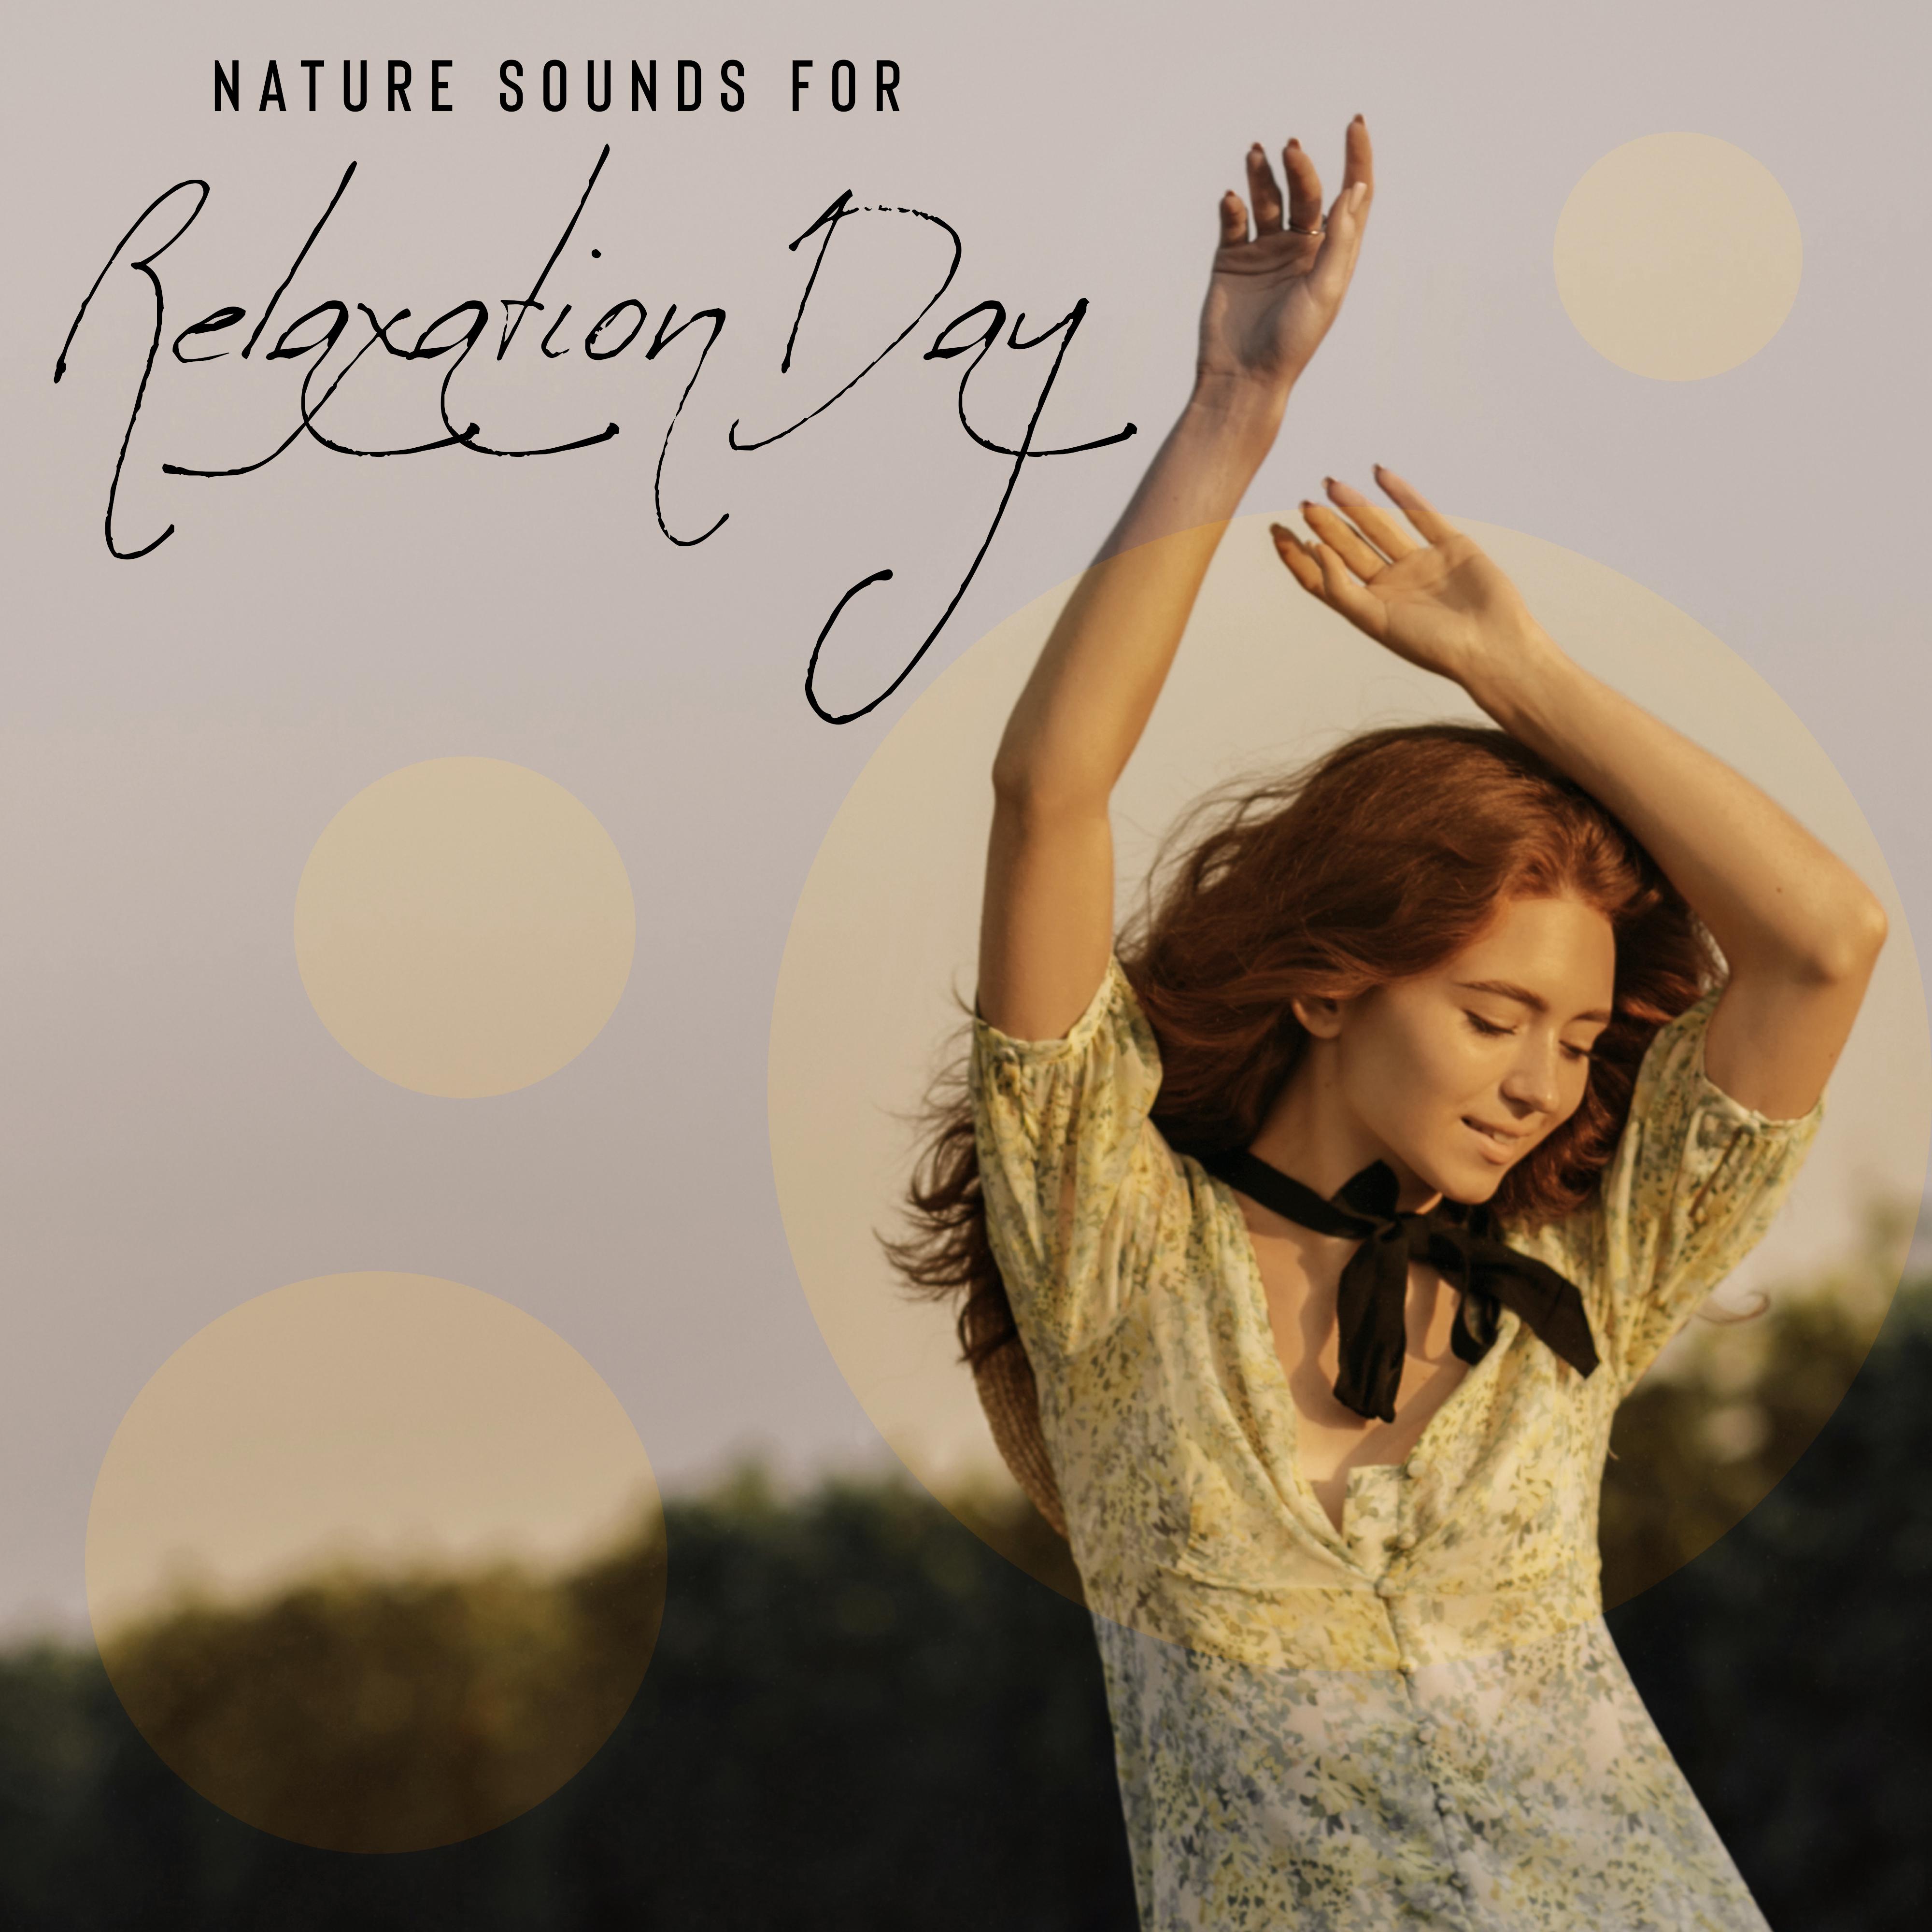 Nature Sounds for Relaxation Day  Ambient Natural Music for Total Mental Rest